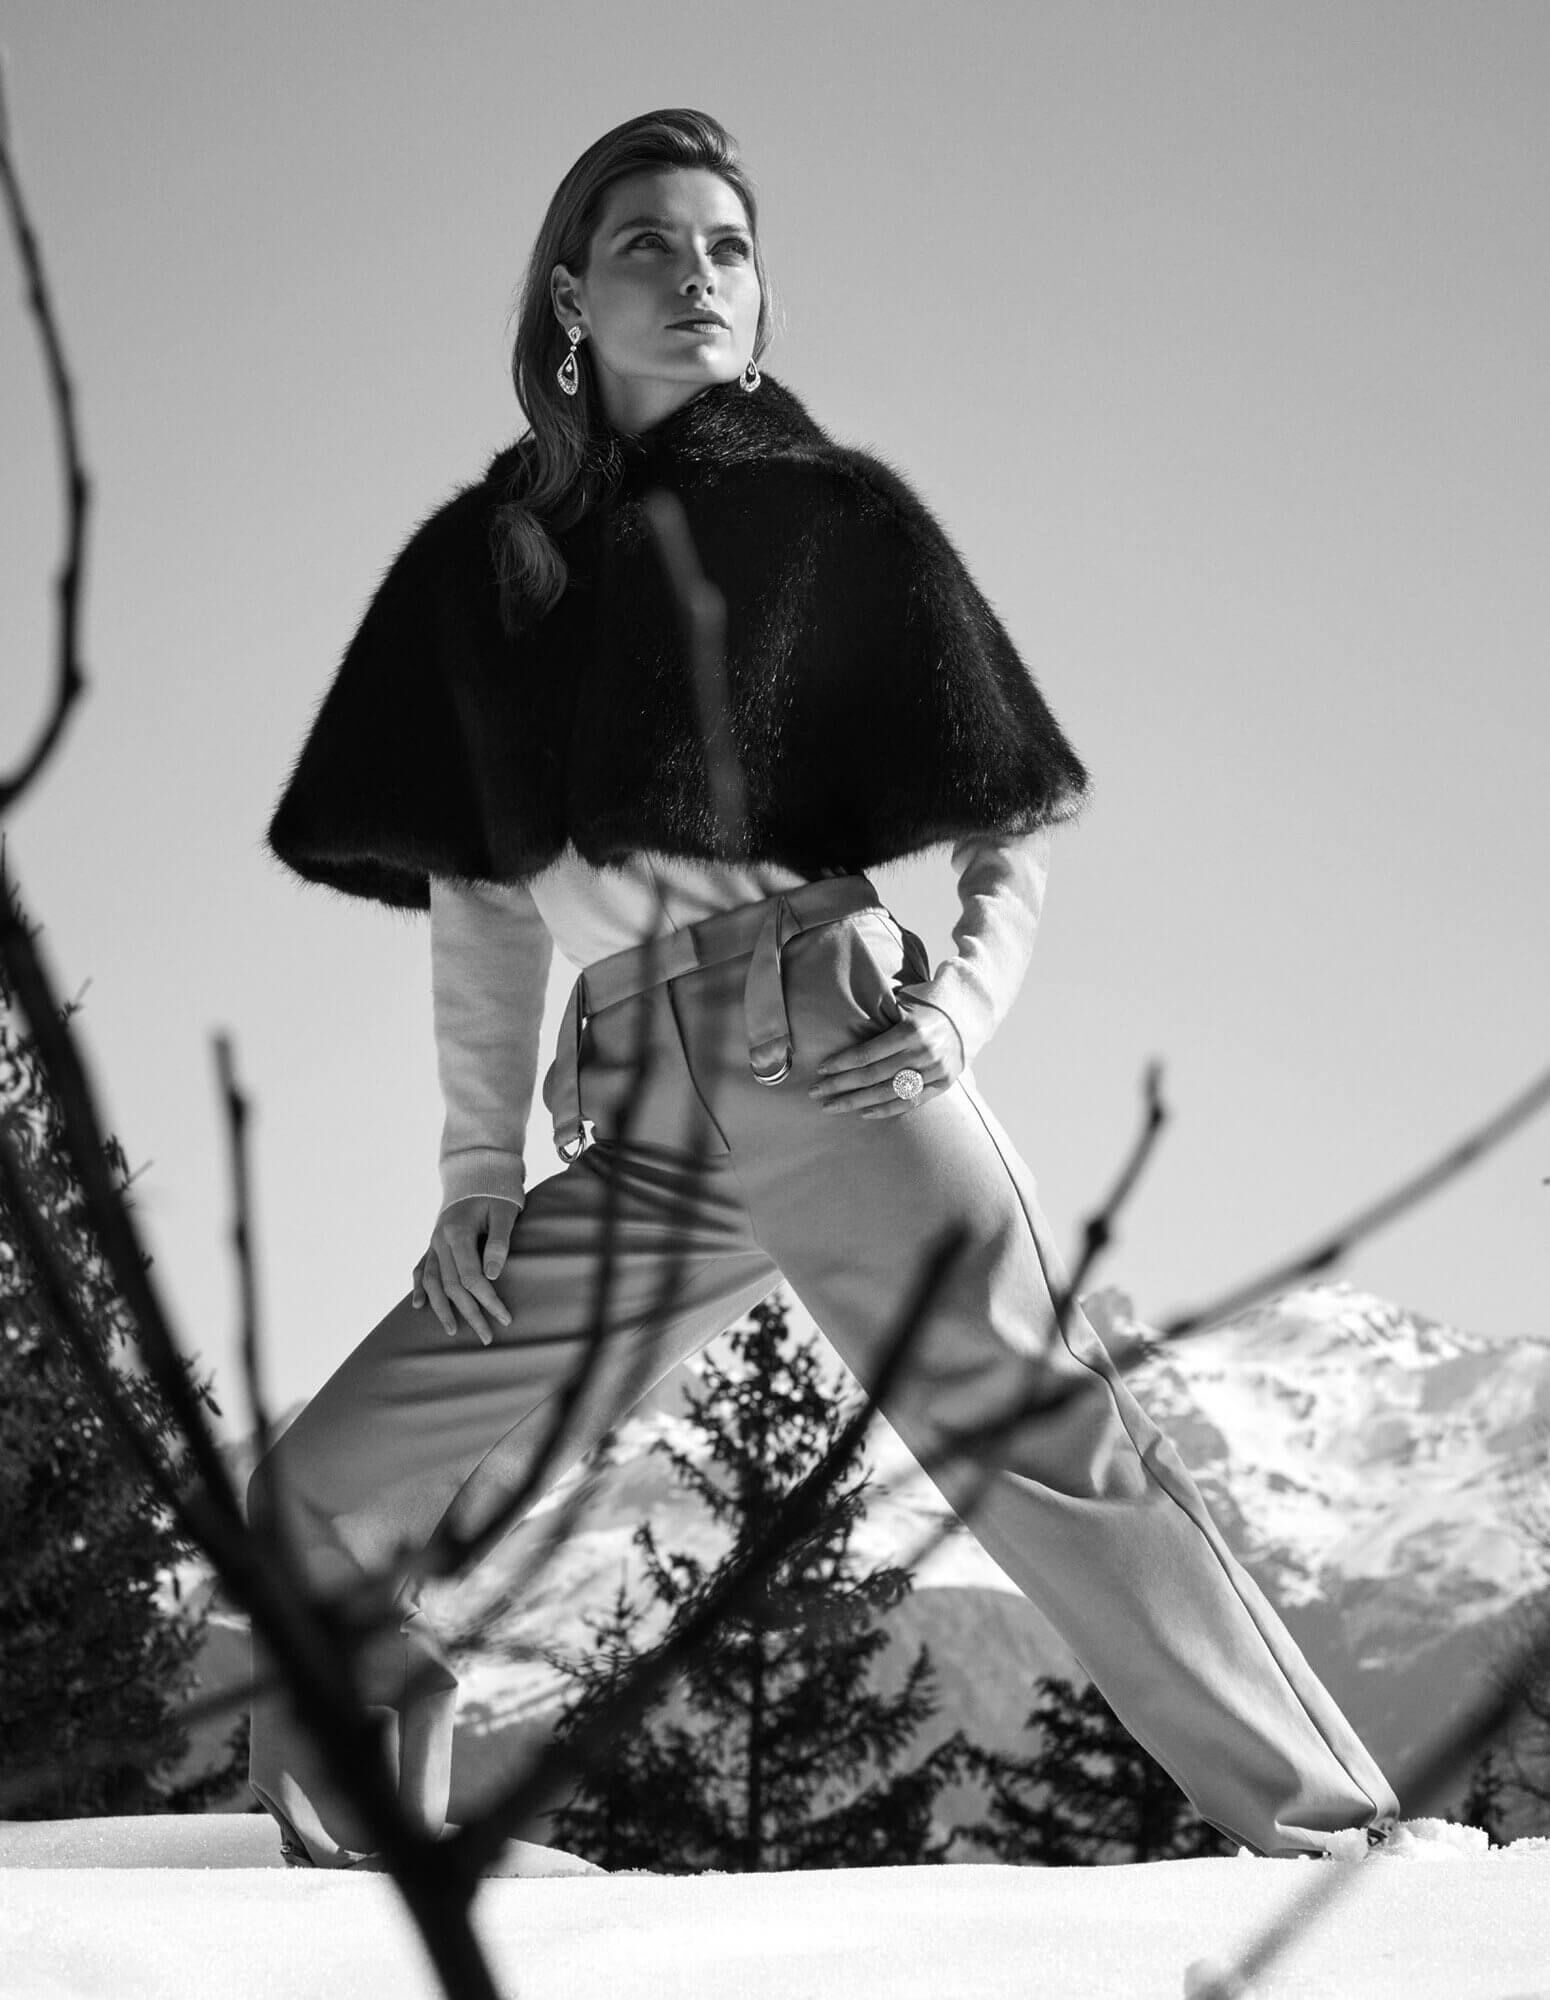 A lady on a ski slope dressed in a fur cape and wearing diamond Luna earrings and a diamond Swirl ring